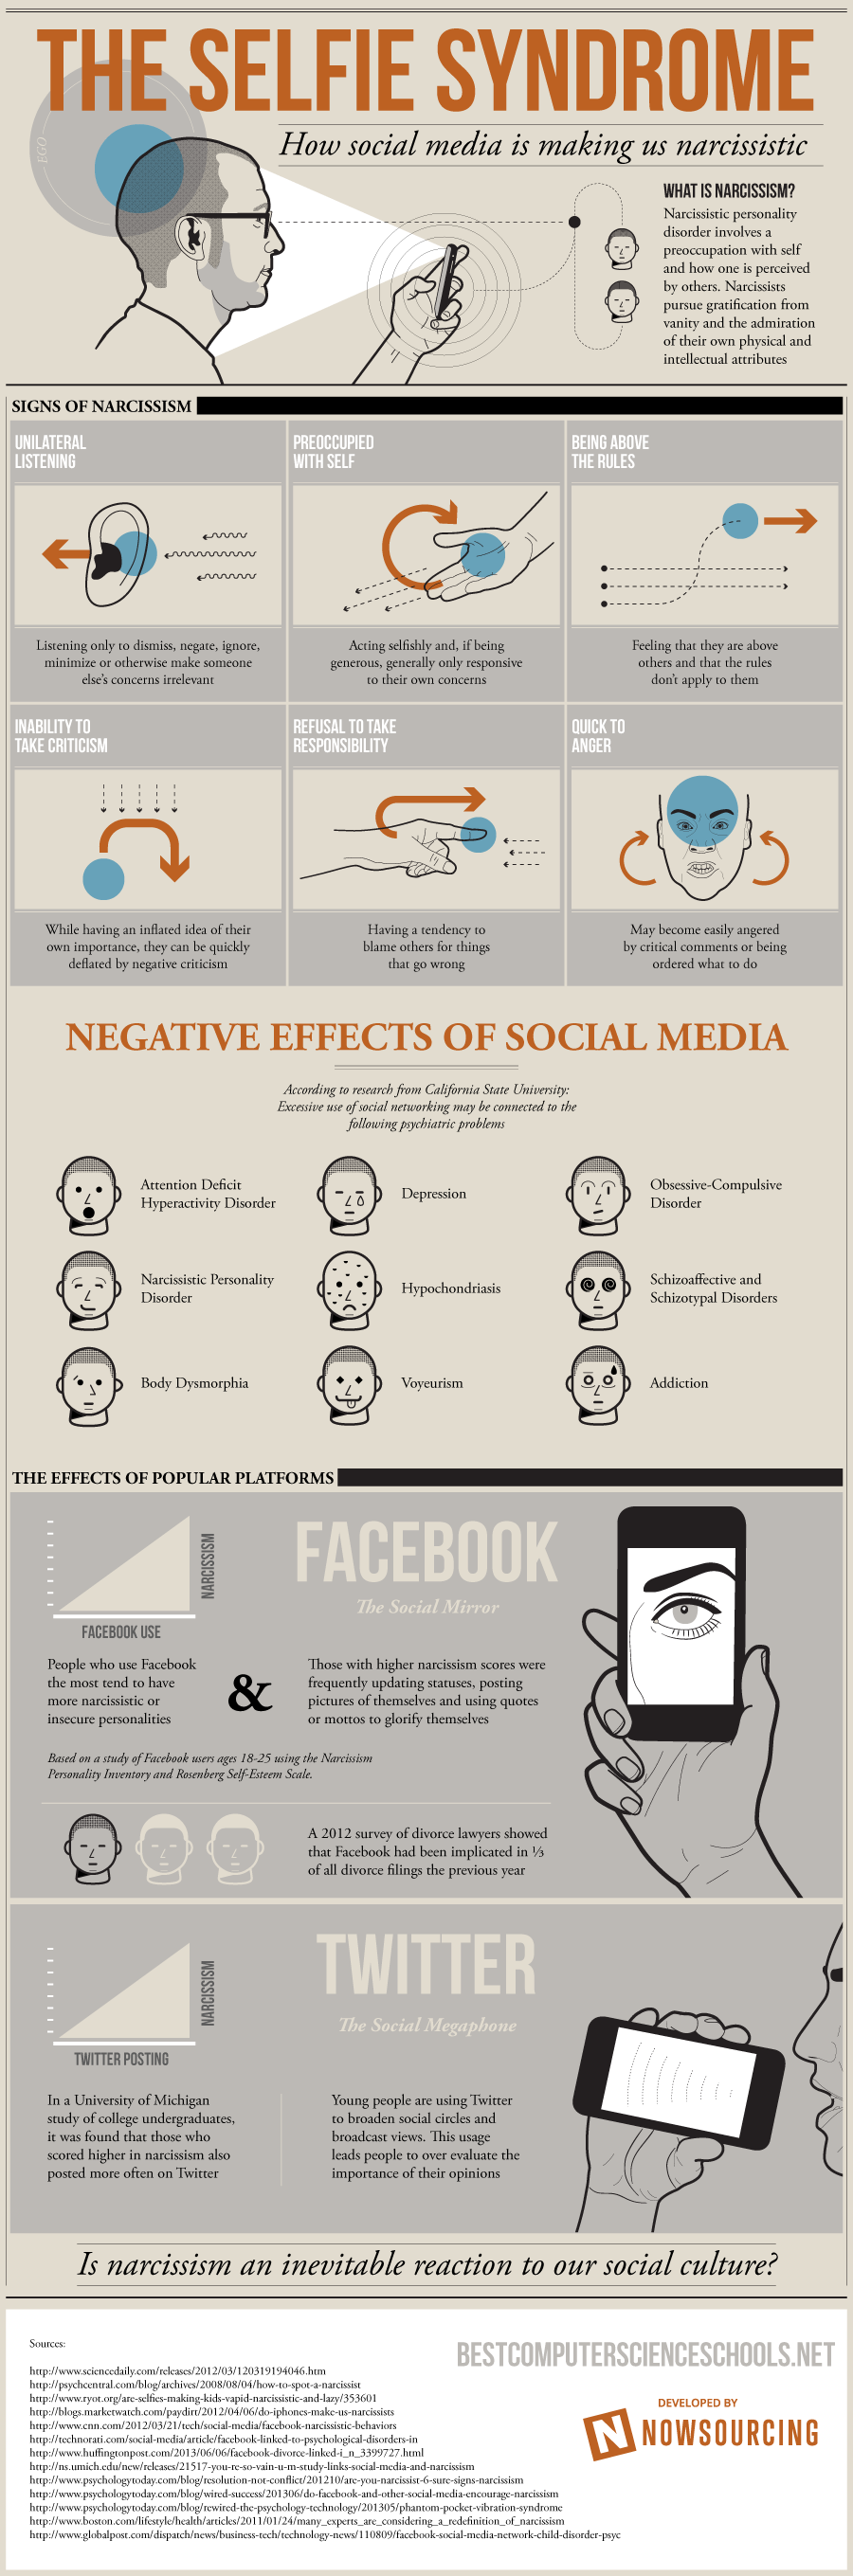 Selfie Syndrome – How Social Media is Making Us Narcissistic (Infographic)